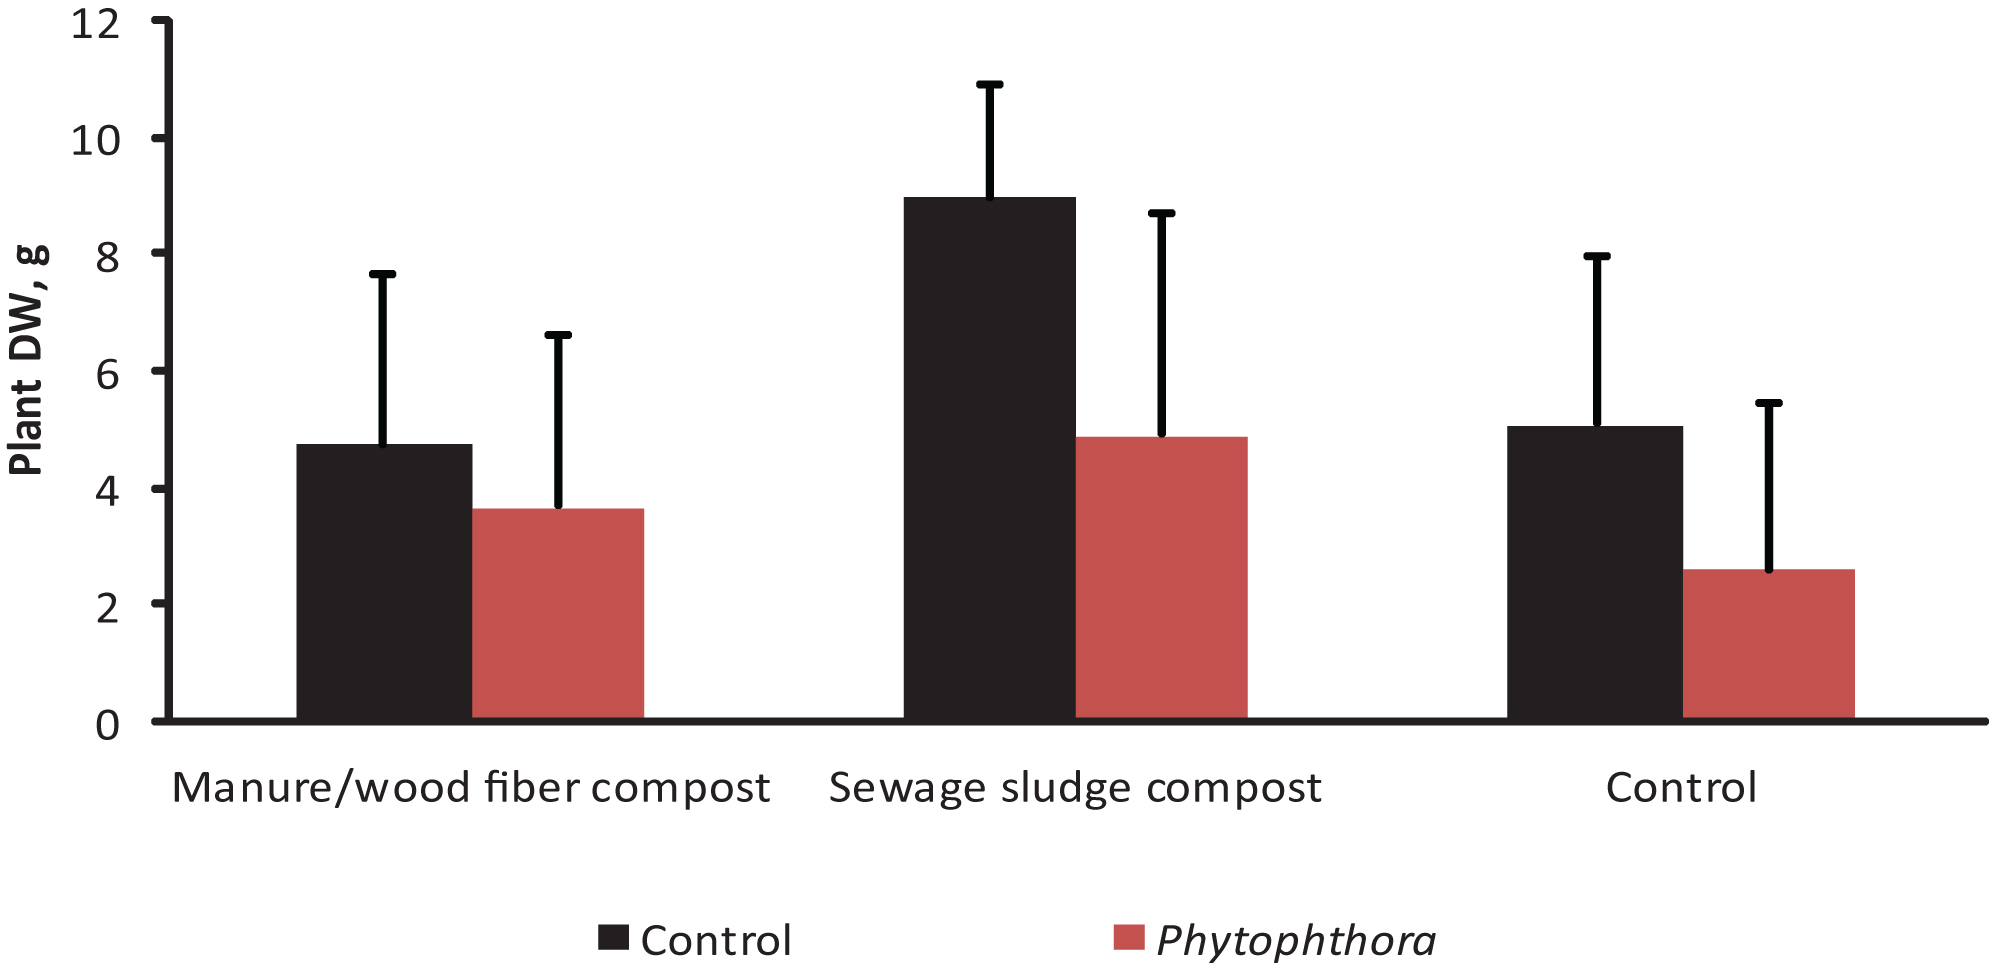 The impact of Phytophthora inoculation on strawberry shoot dry weight (mean+std; N = 24) on two growing media containing compost and in the control without compost (experiment 3, see Tables 1 & 2). The results are means of three microbial and a control treatment. The differences between Phytophthora-inoculated and controls were significant on sewage sludge compost containing growing medium (df = 105, F-value = 6,28, P <  0.0001) and on the control growing medium (df = 105, F-value = 3,81, P = 0.0031).